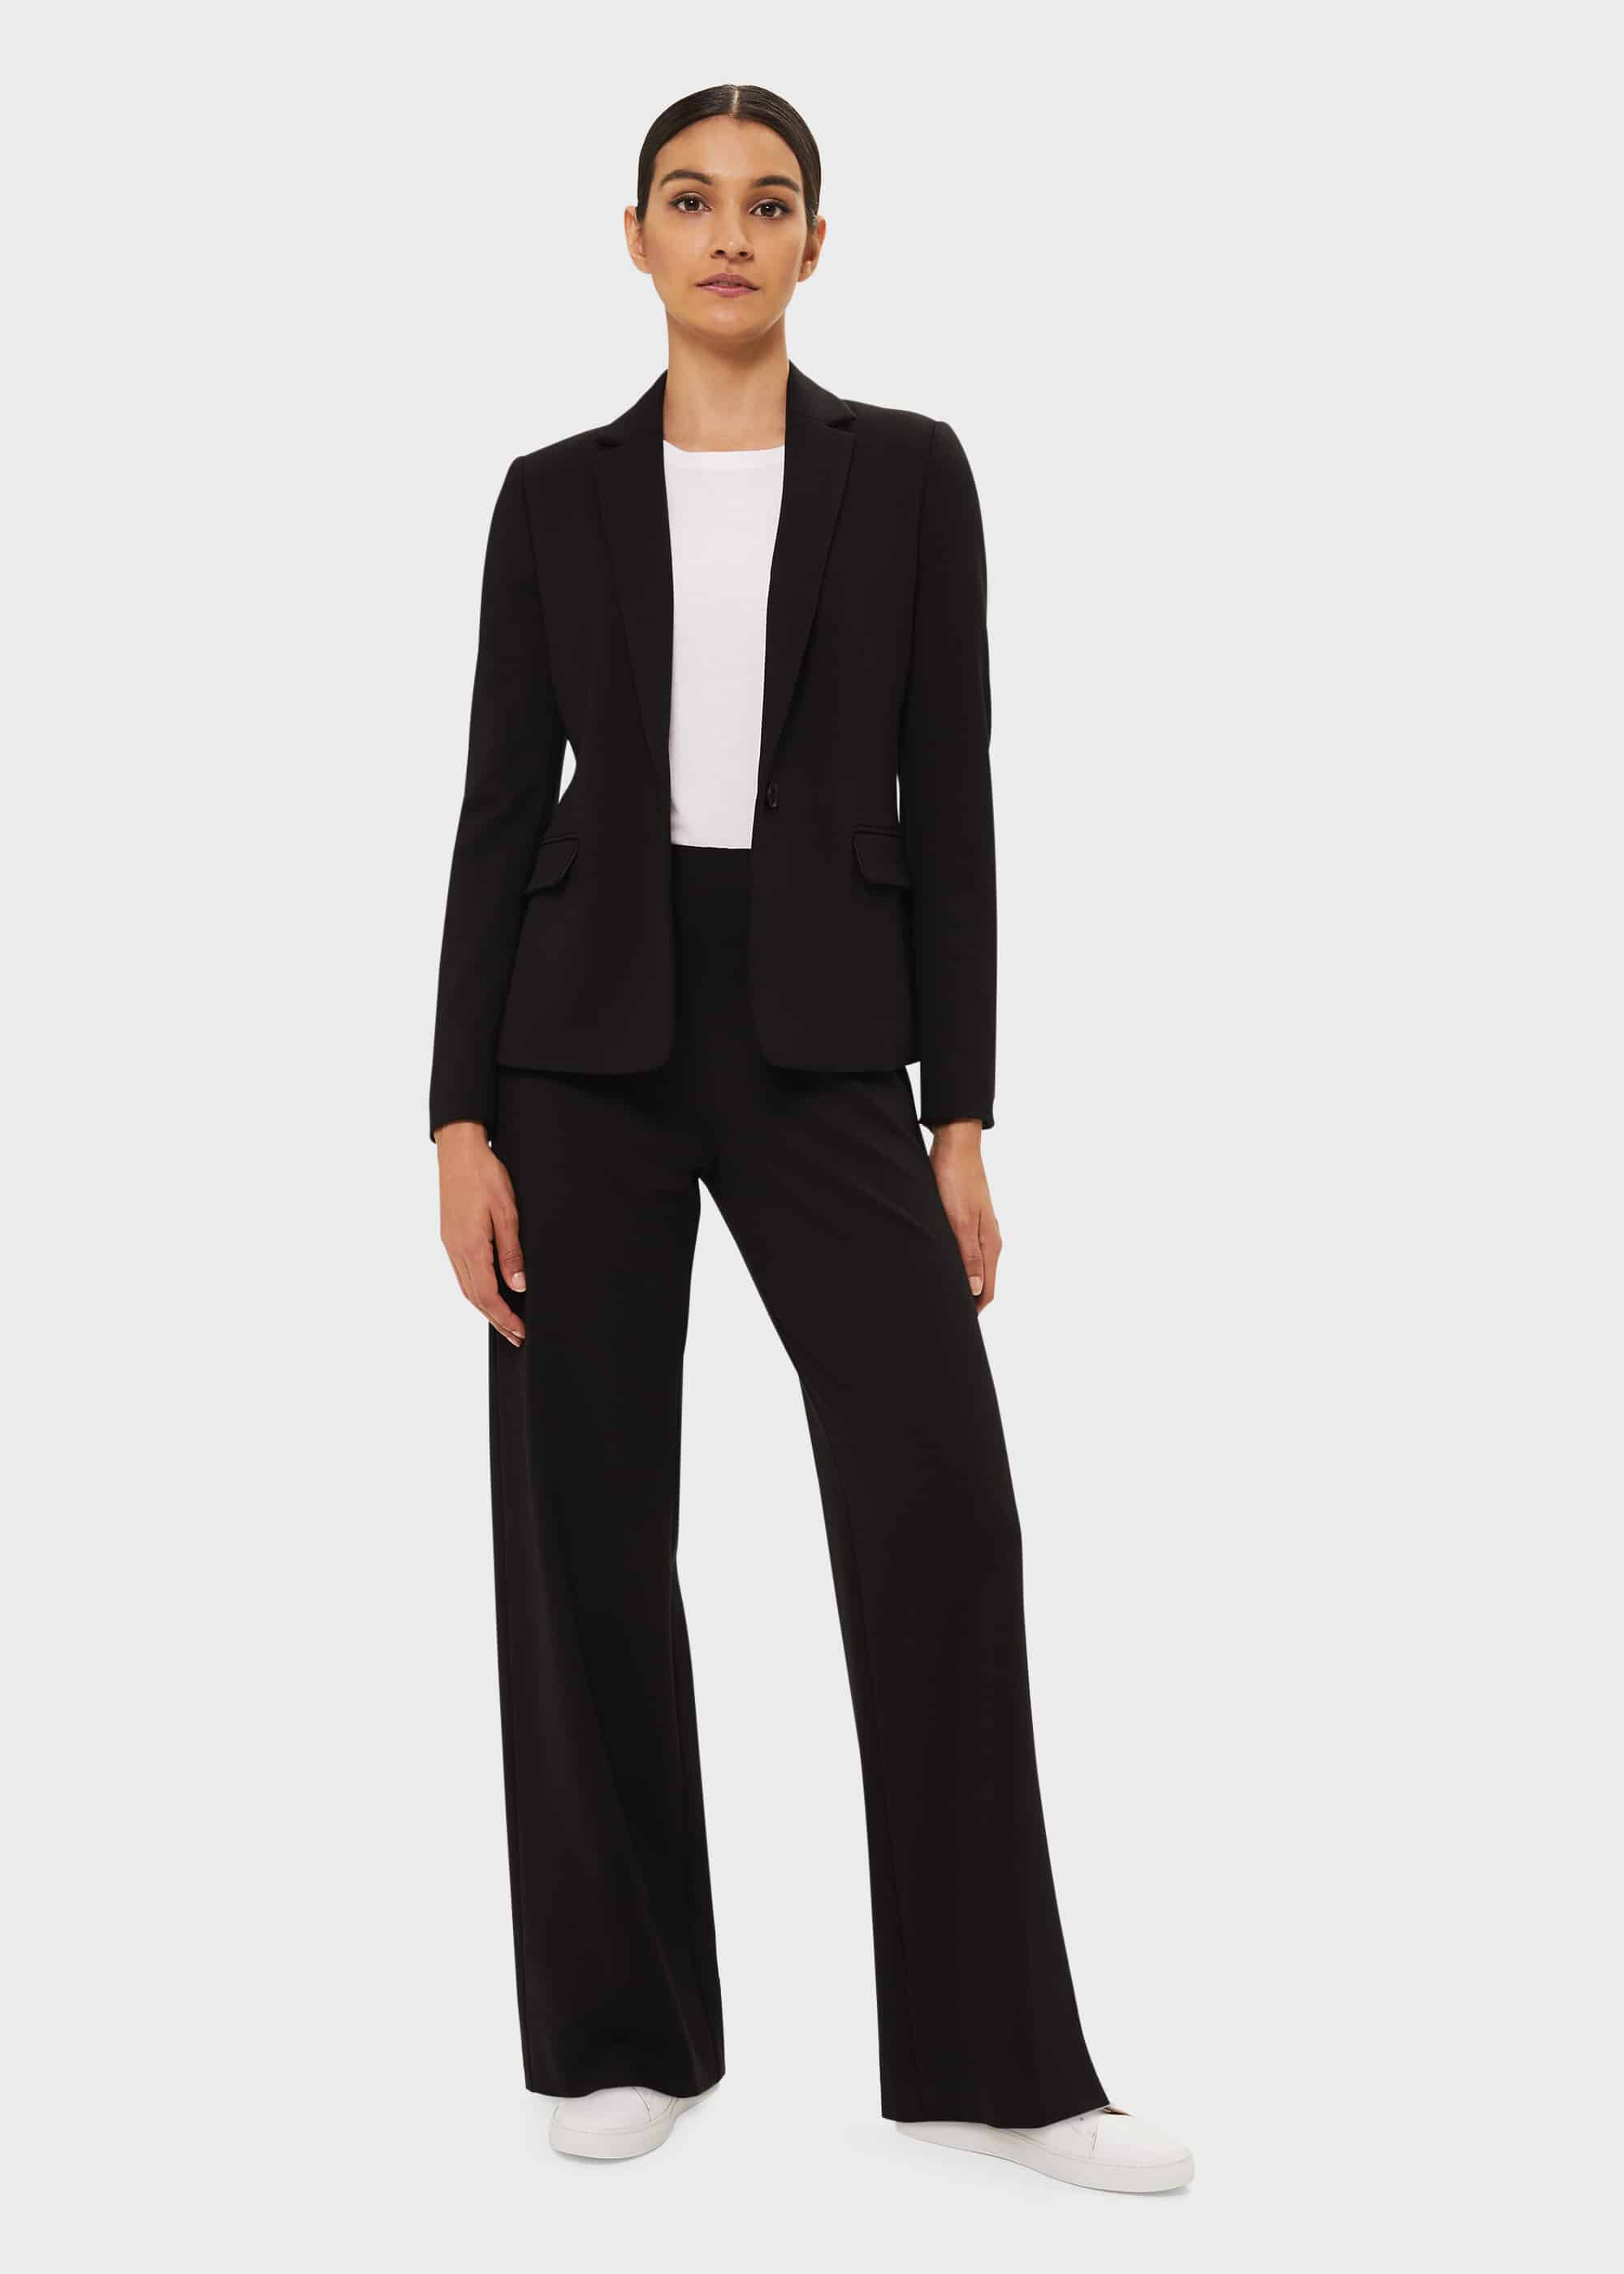 blazer and trouser suit